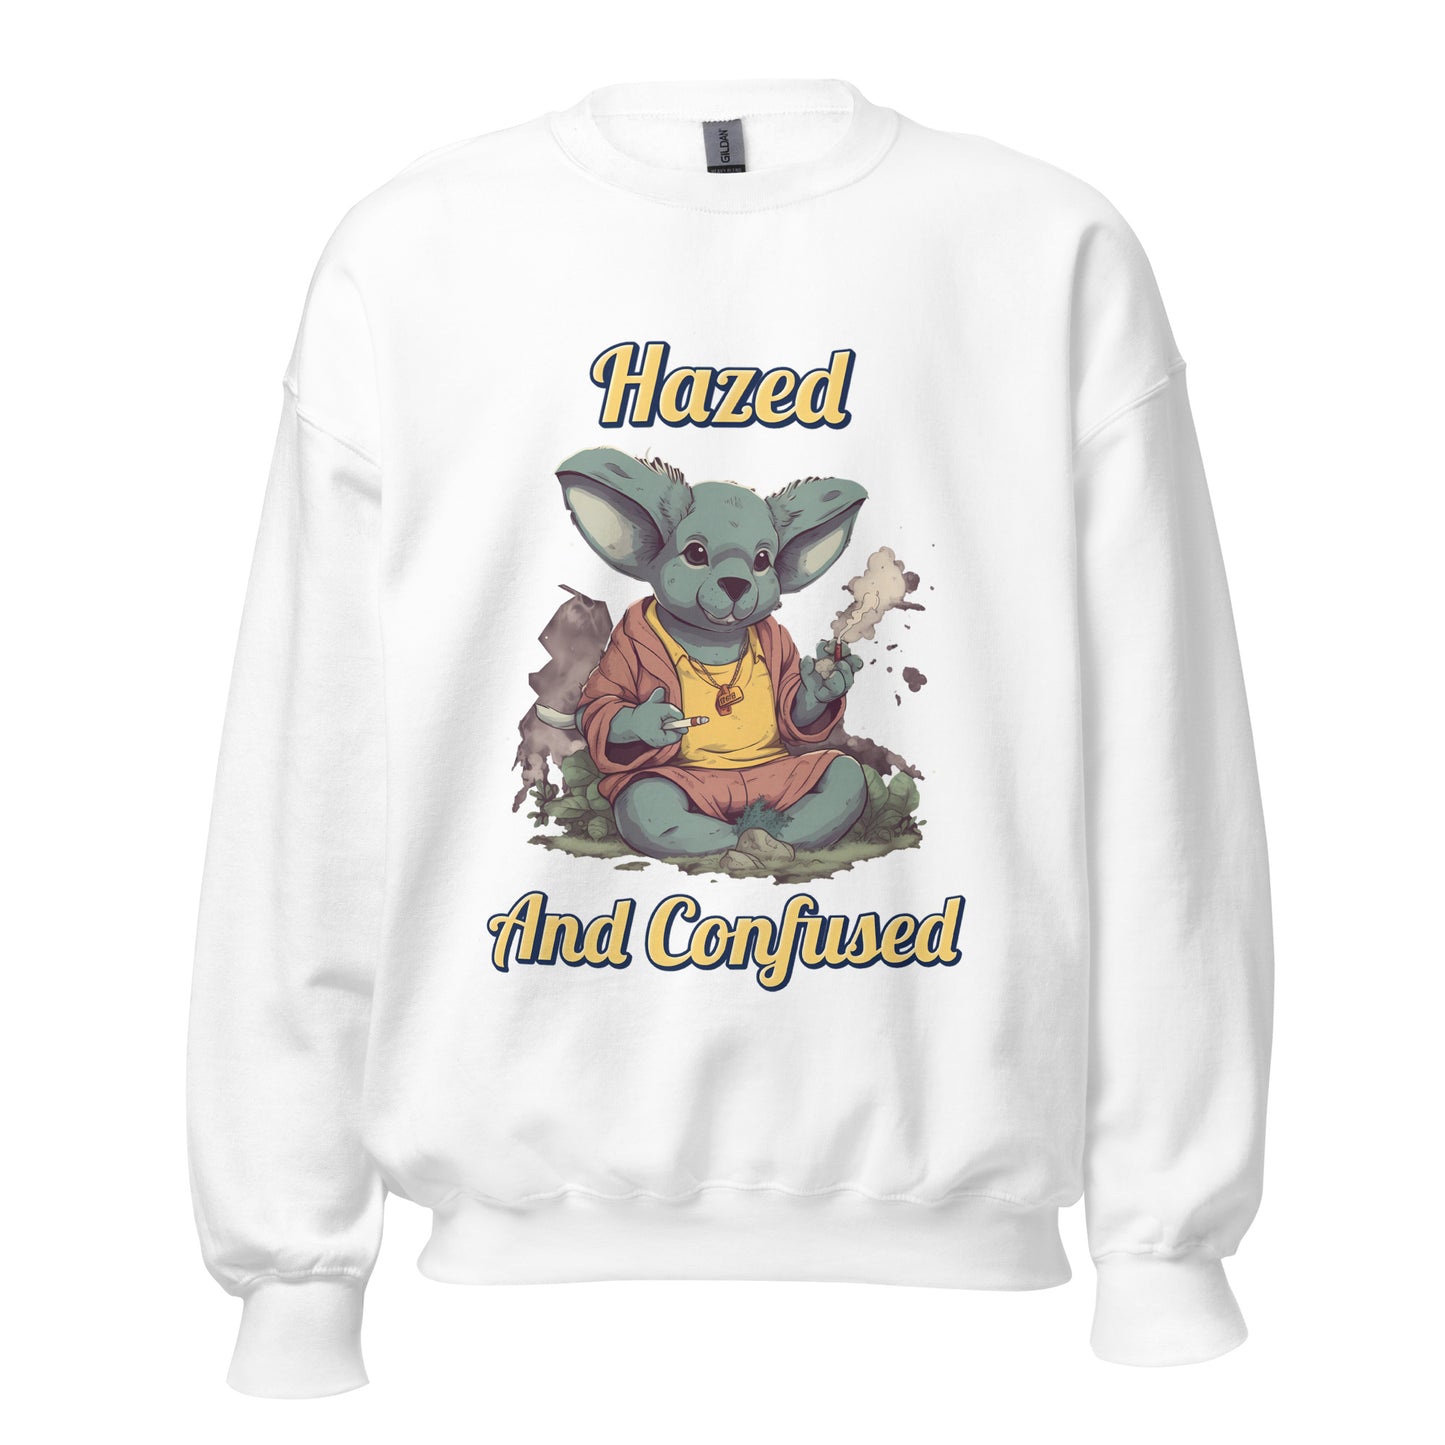 Chill Koala Vibes Graphic Sweatshirt: Stay Cozy and Laid-Back with a Stoner Twist